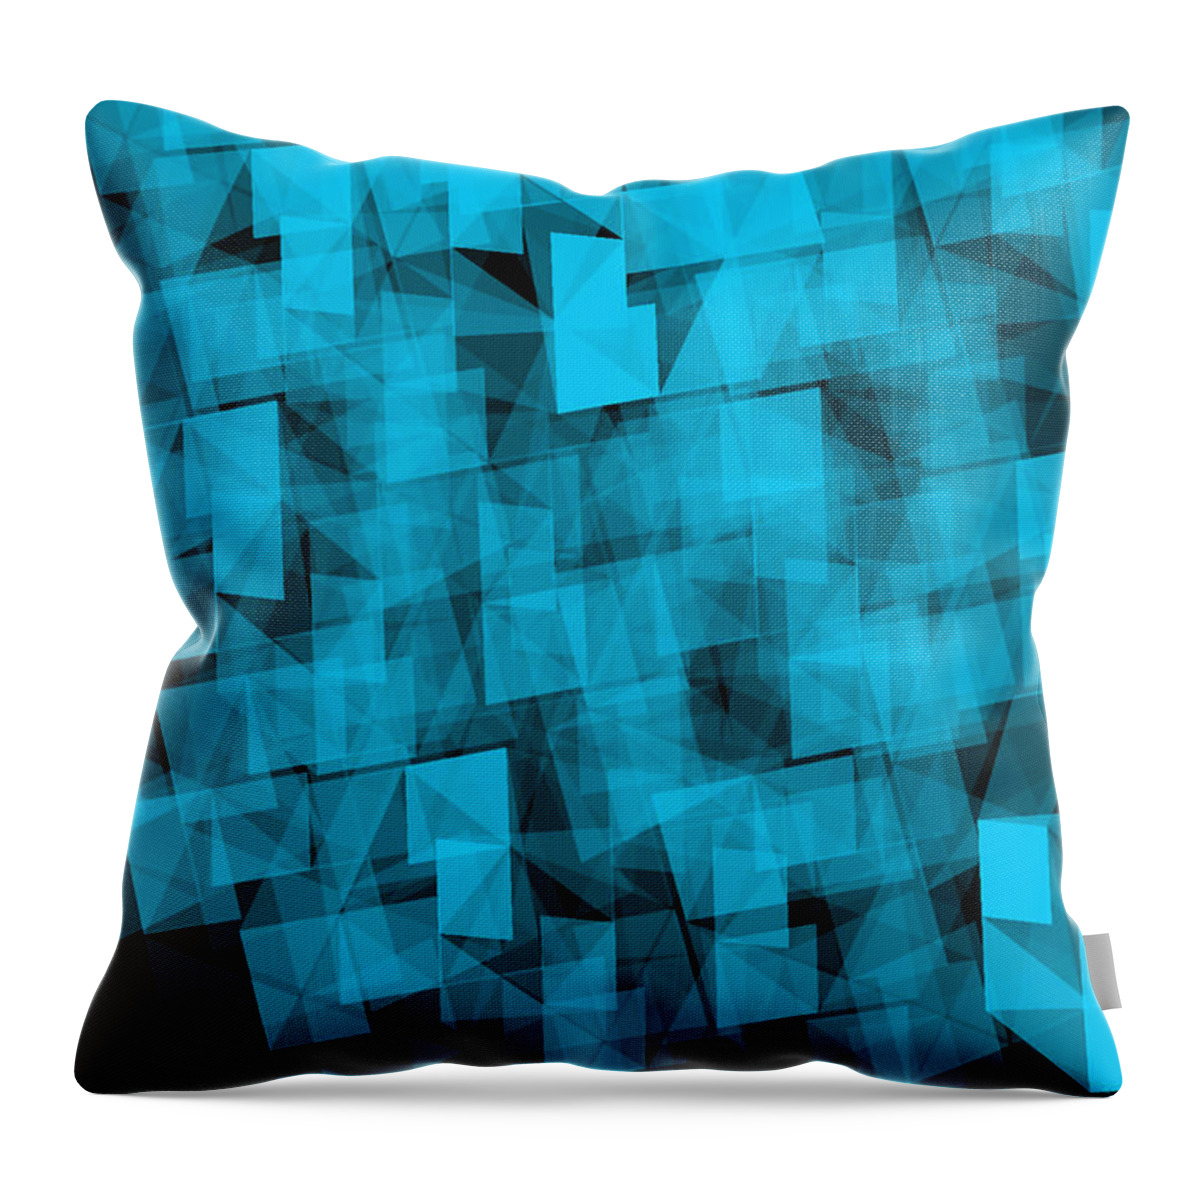 Blue Throw Pillow featuring the photograph Blue Geometric by Bonnie Bruno